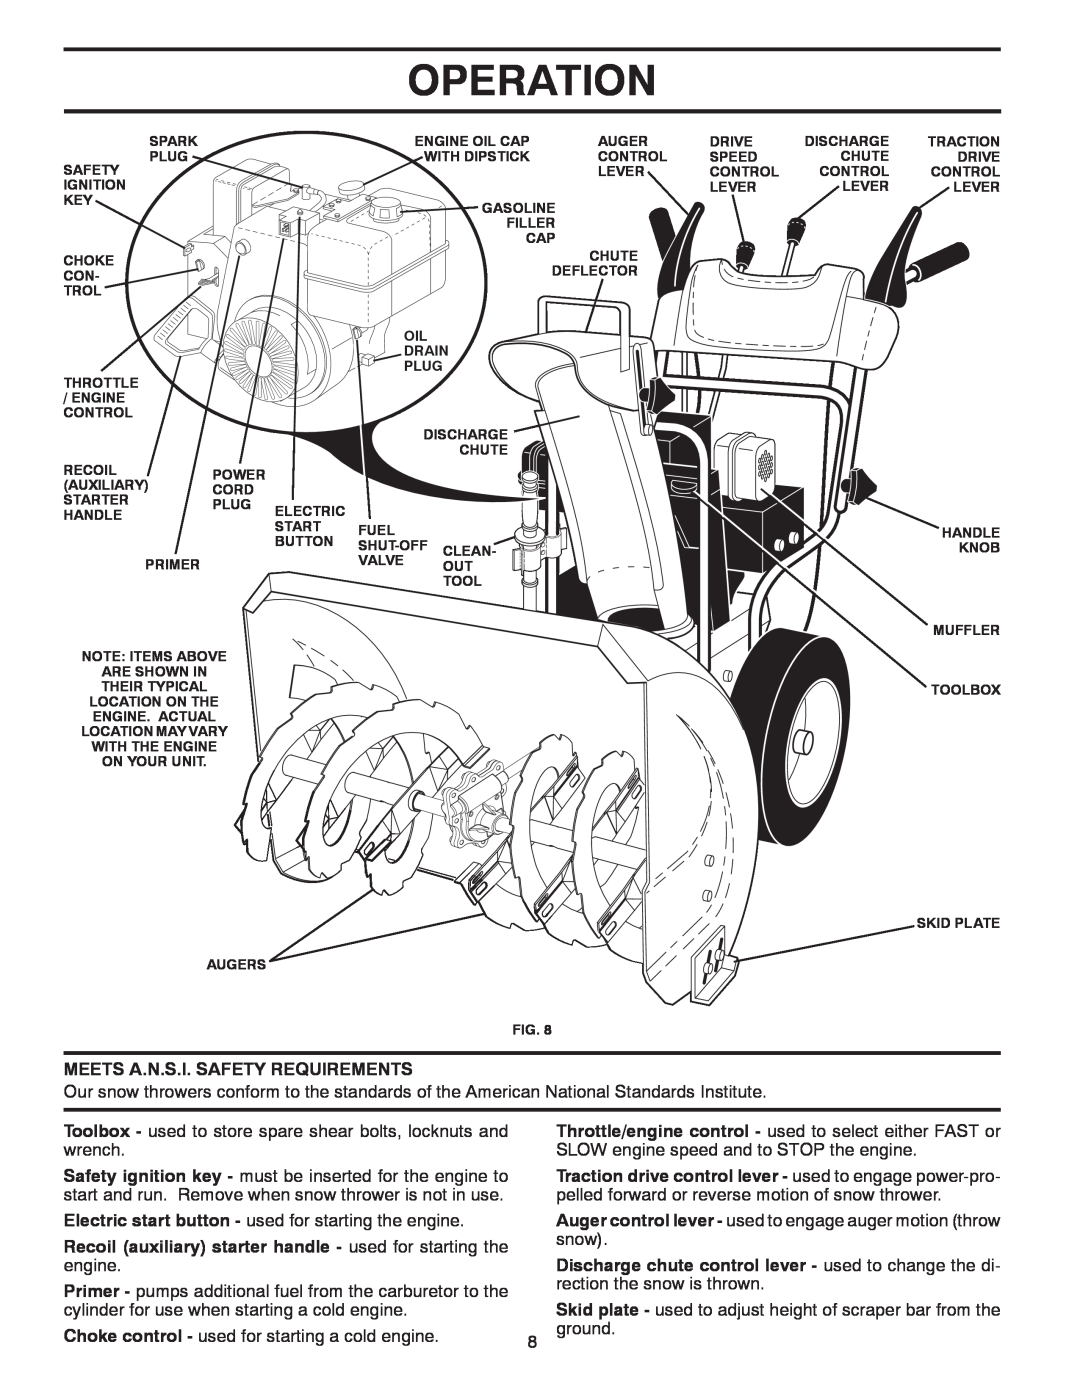 Poulan 416810 owner manual Operation, Meets A.N.S.I. Safety Requirements 